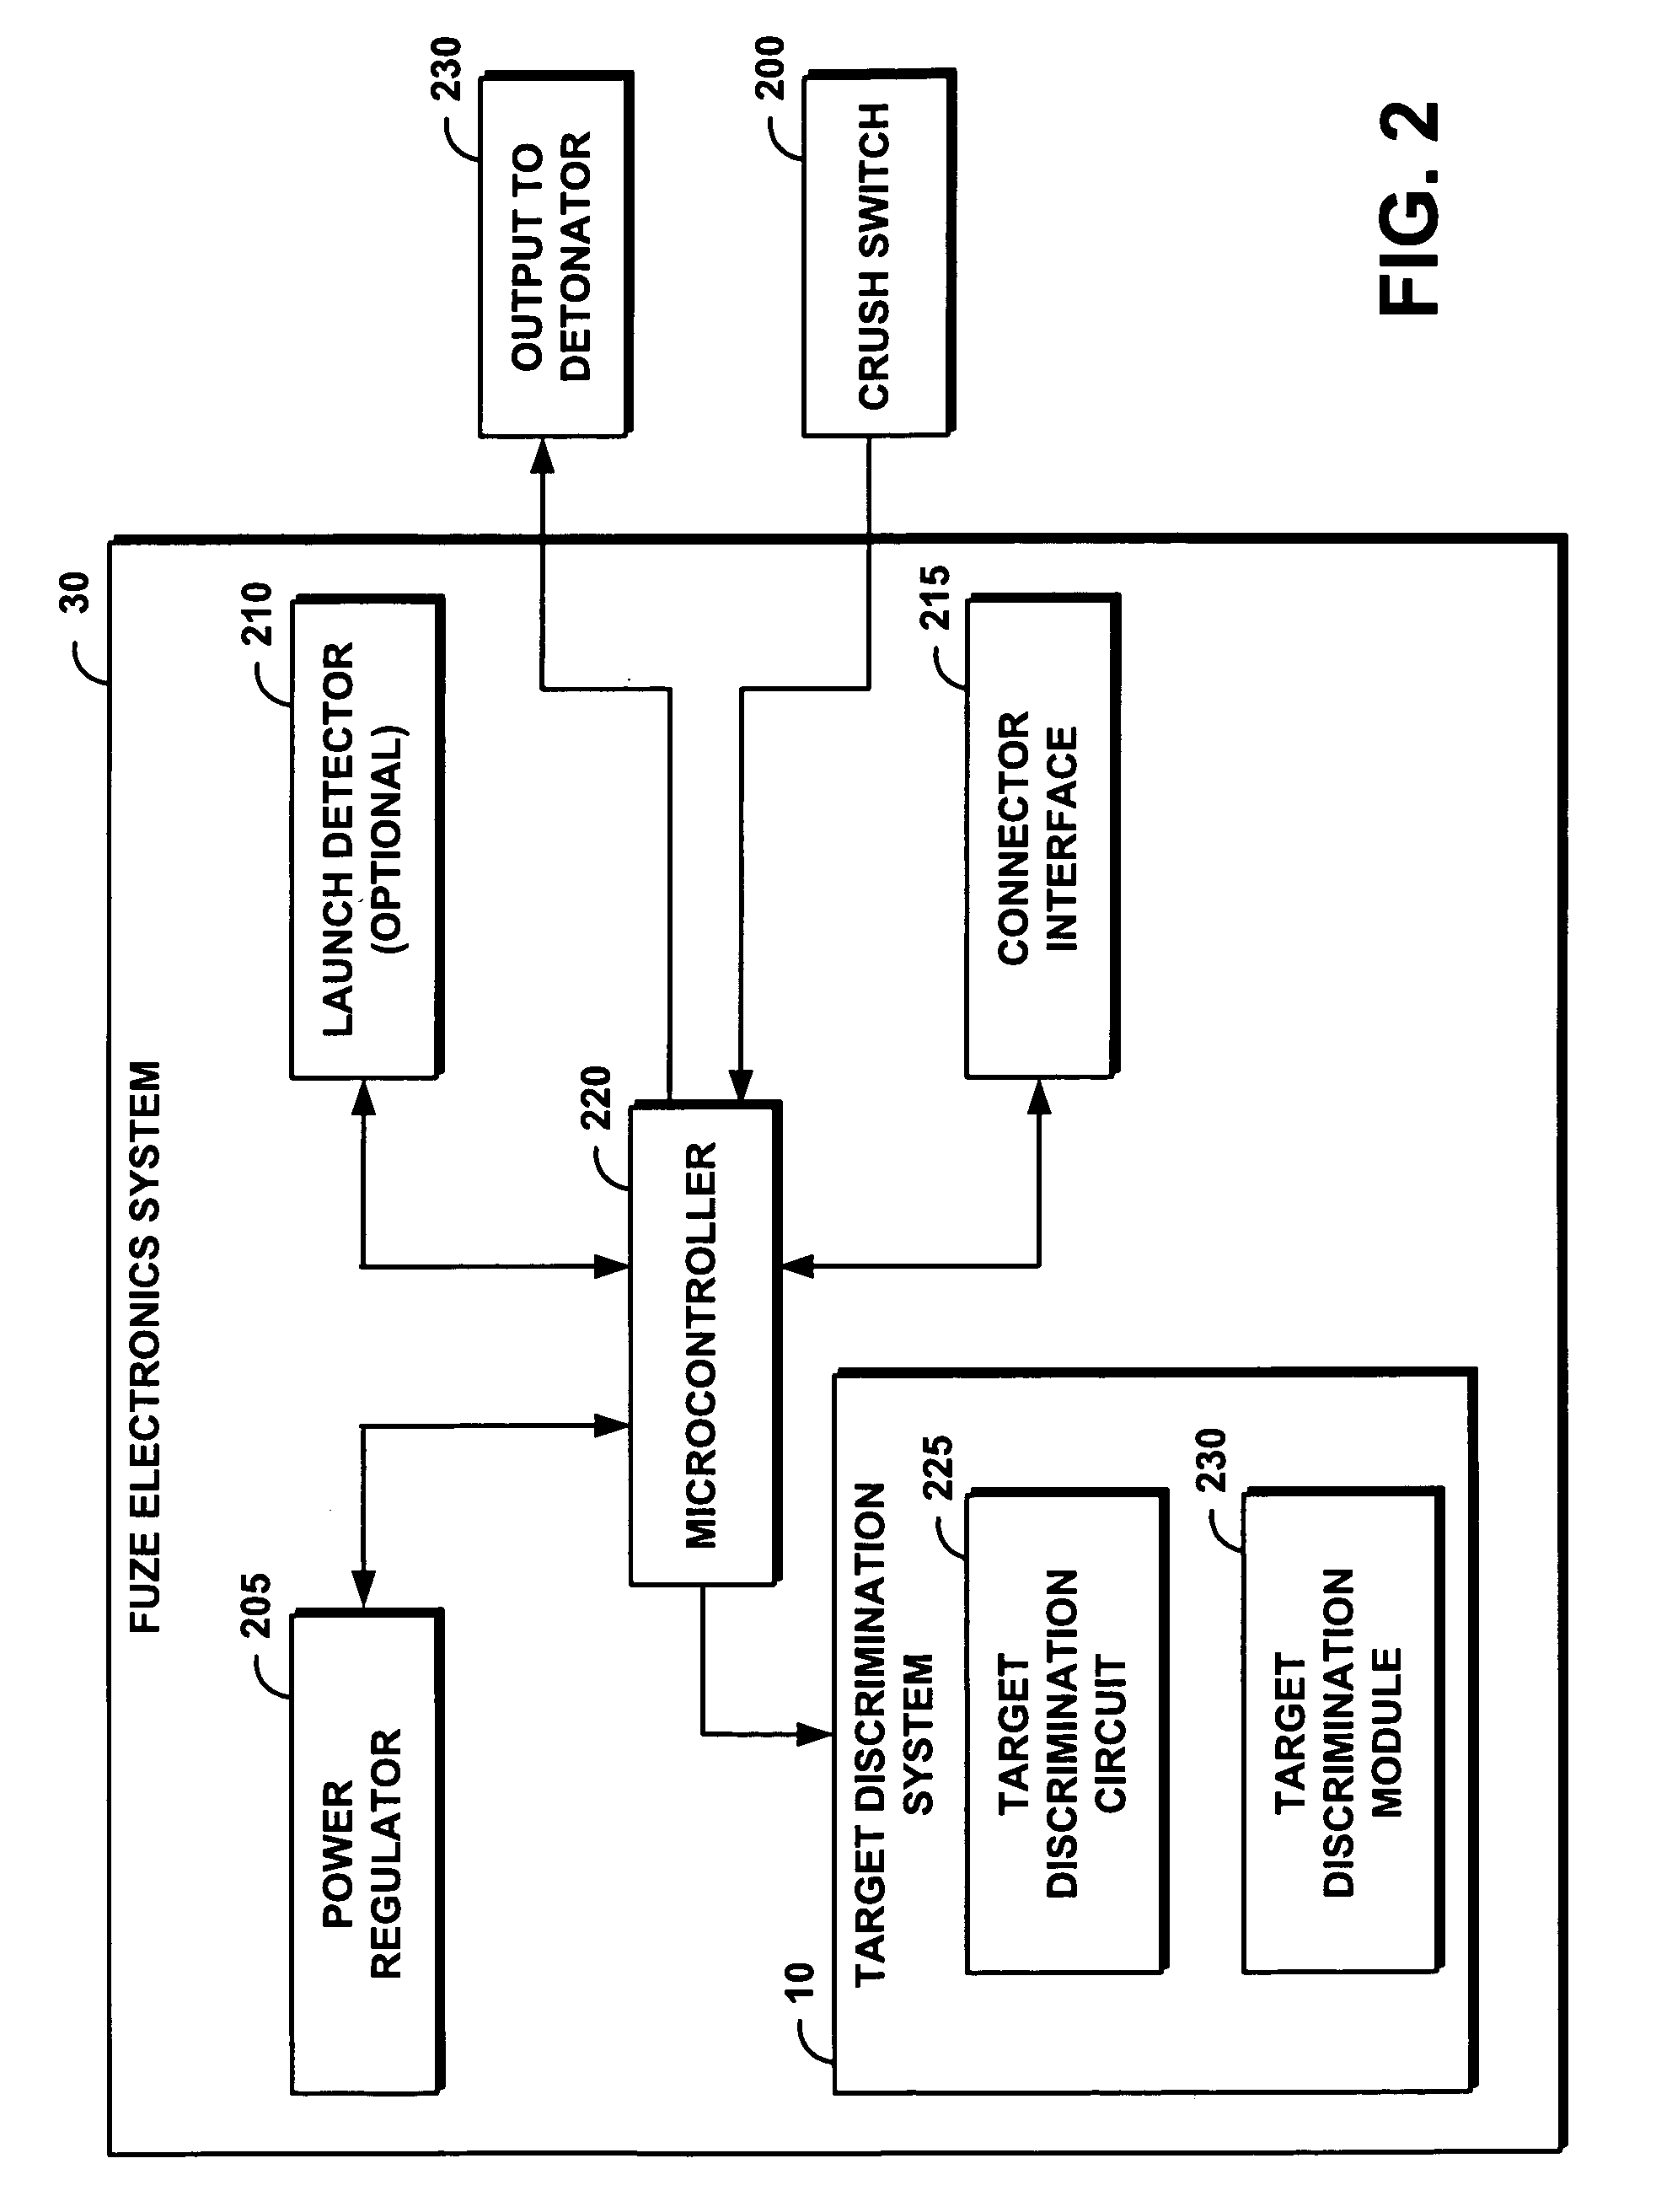 System and method for electronically discriminating a target